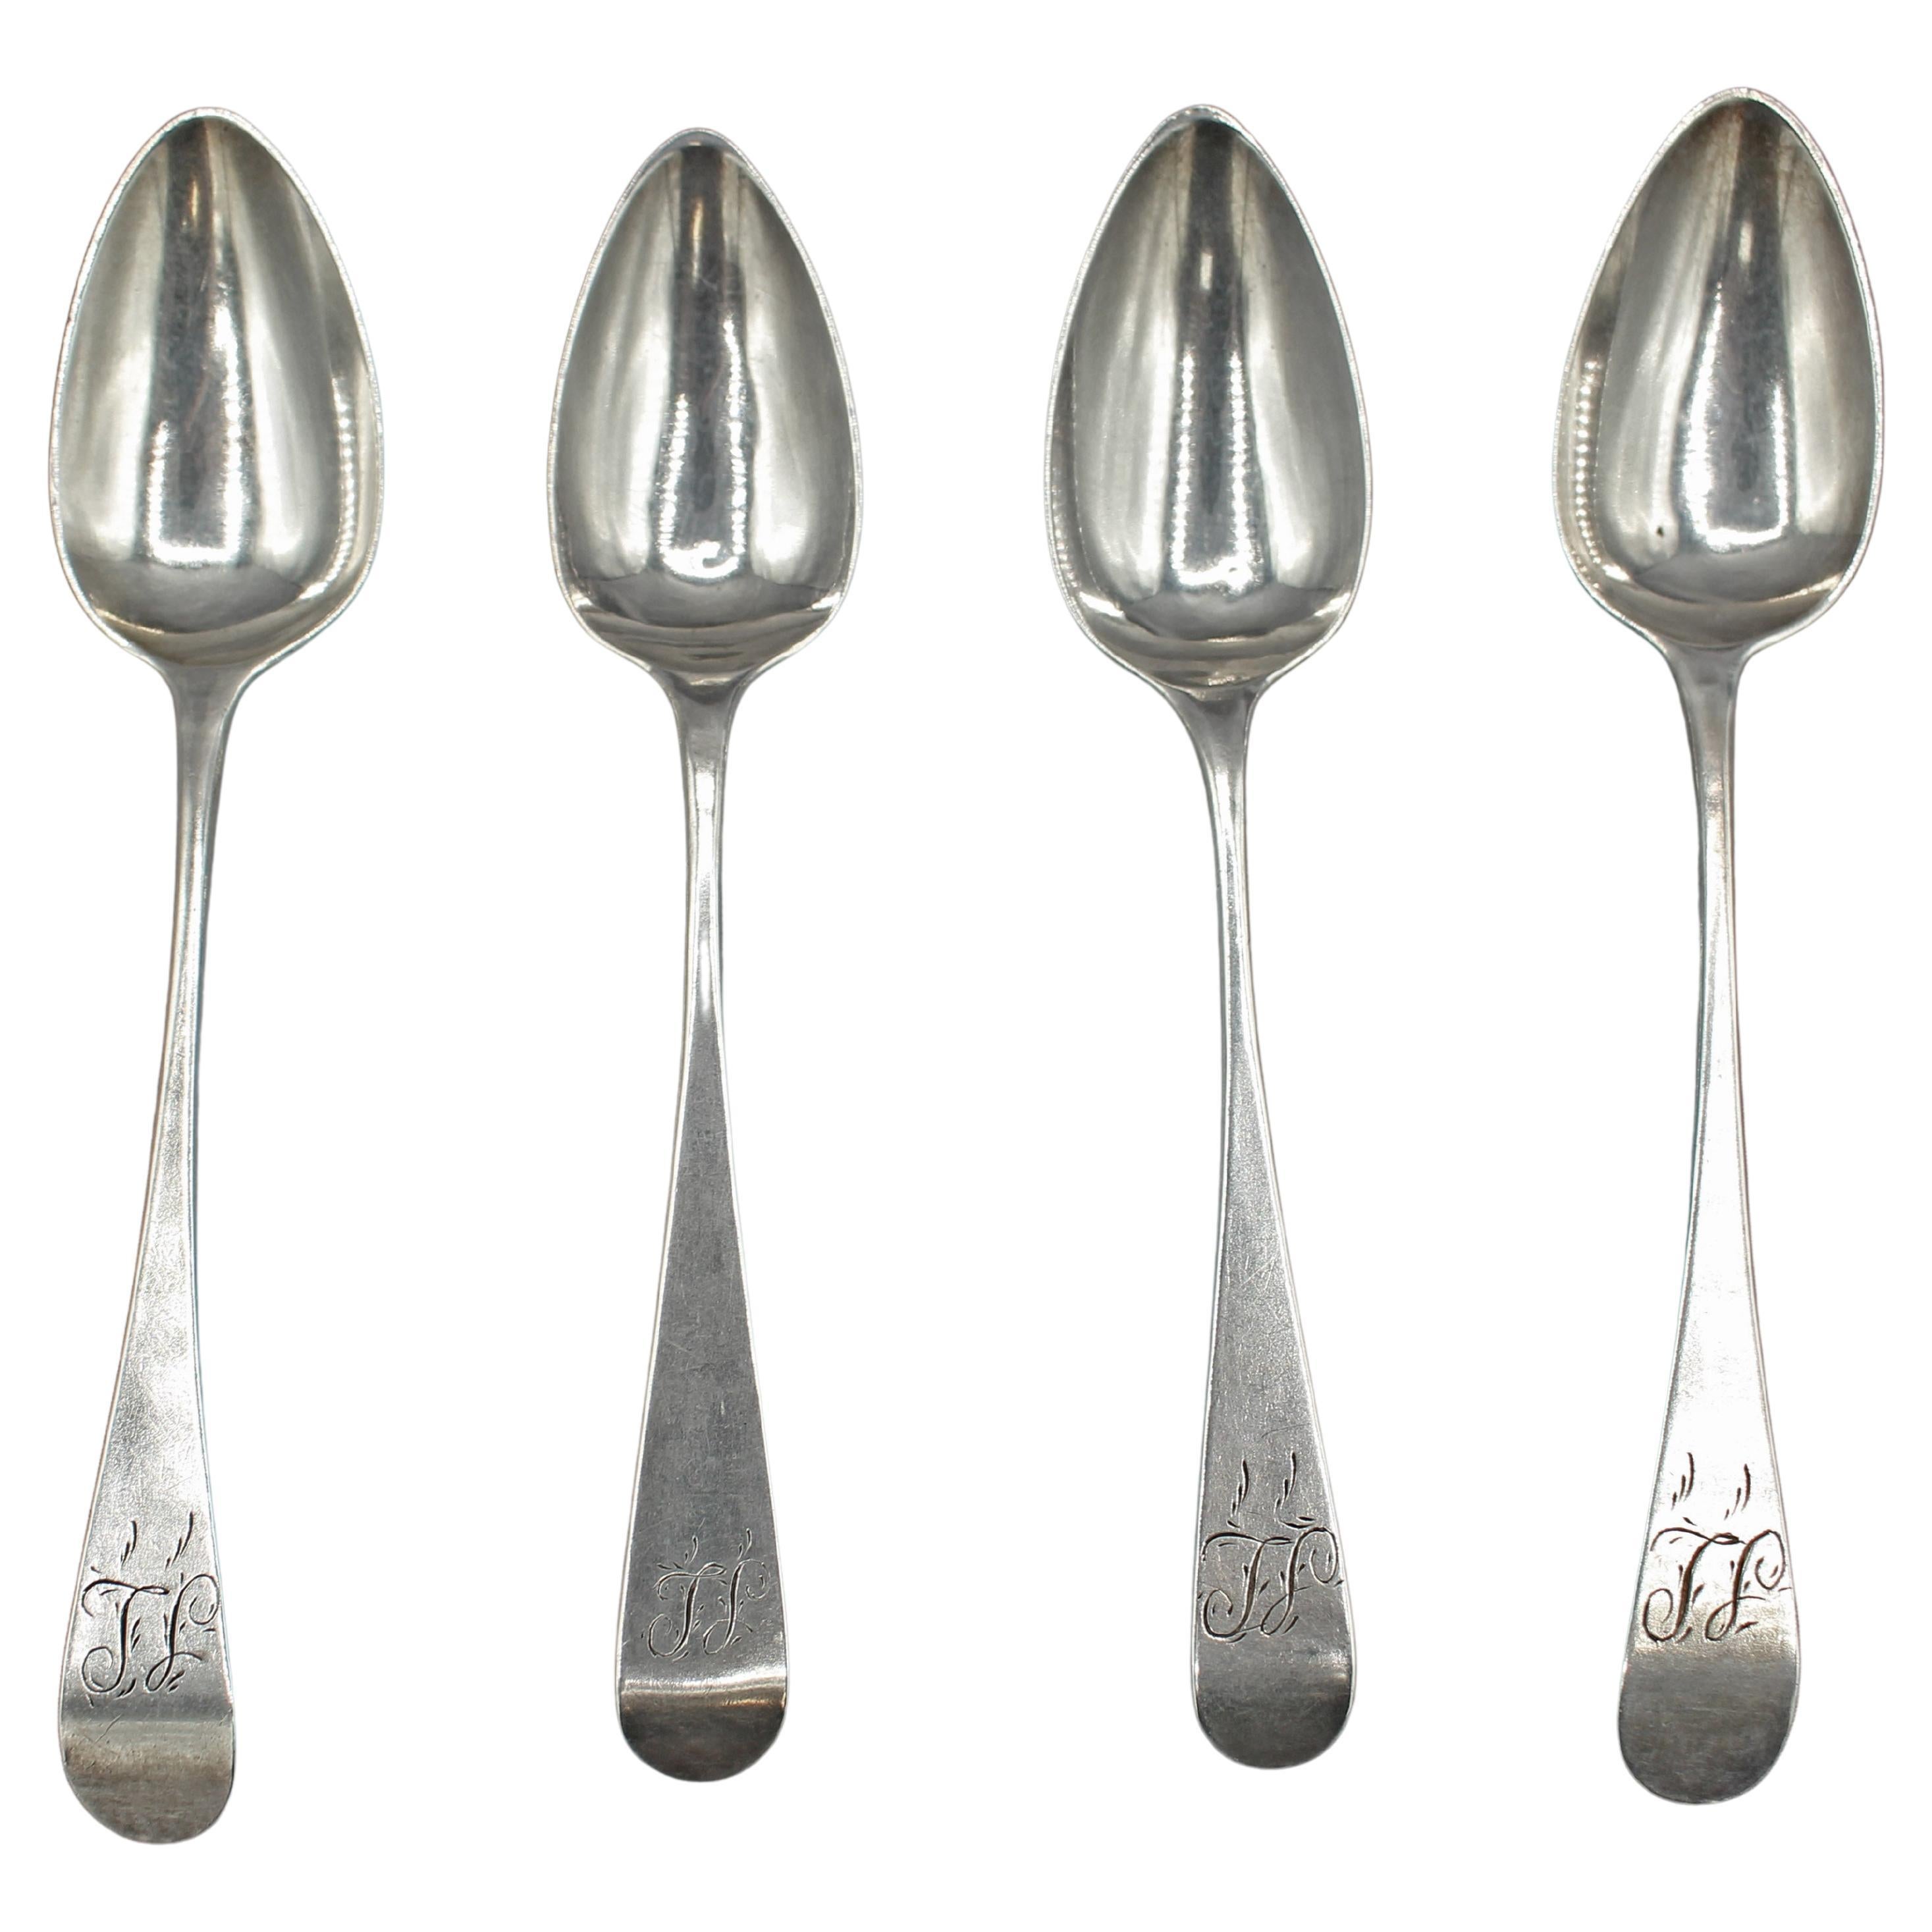 Assembled Set of 4 Sterling Silver Coffee Spoons by the Bateman Family For Sale